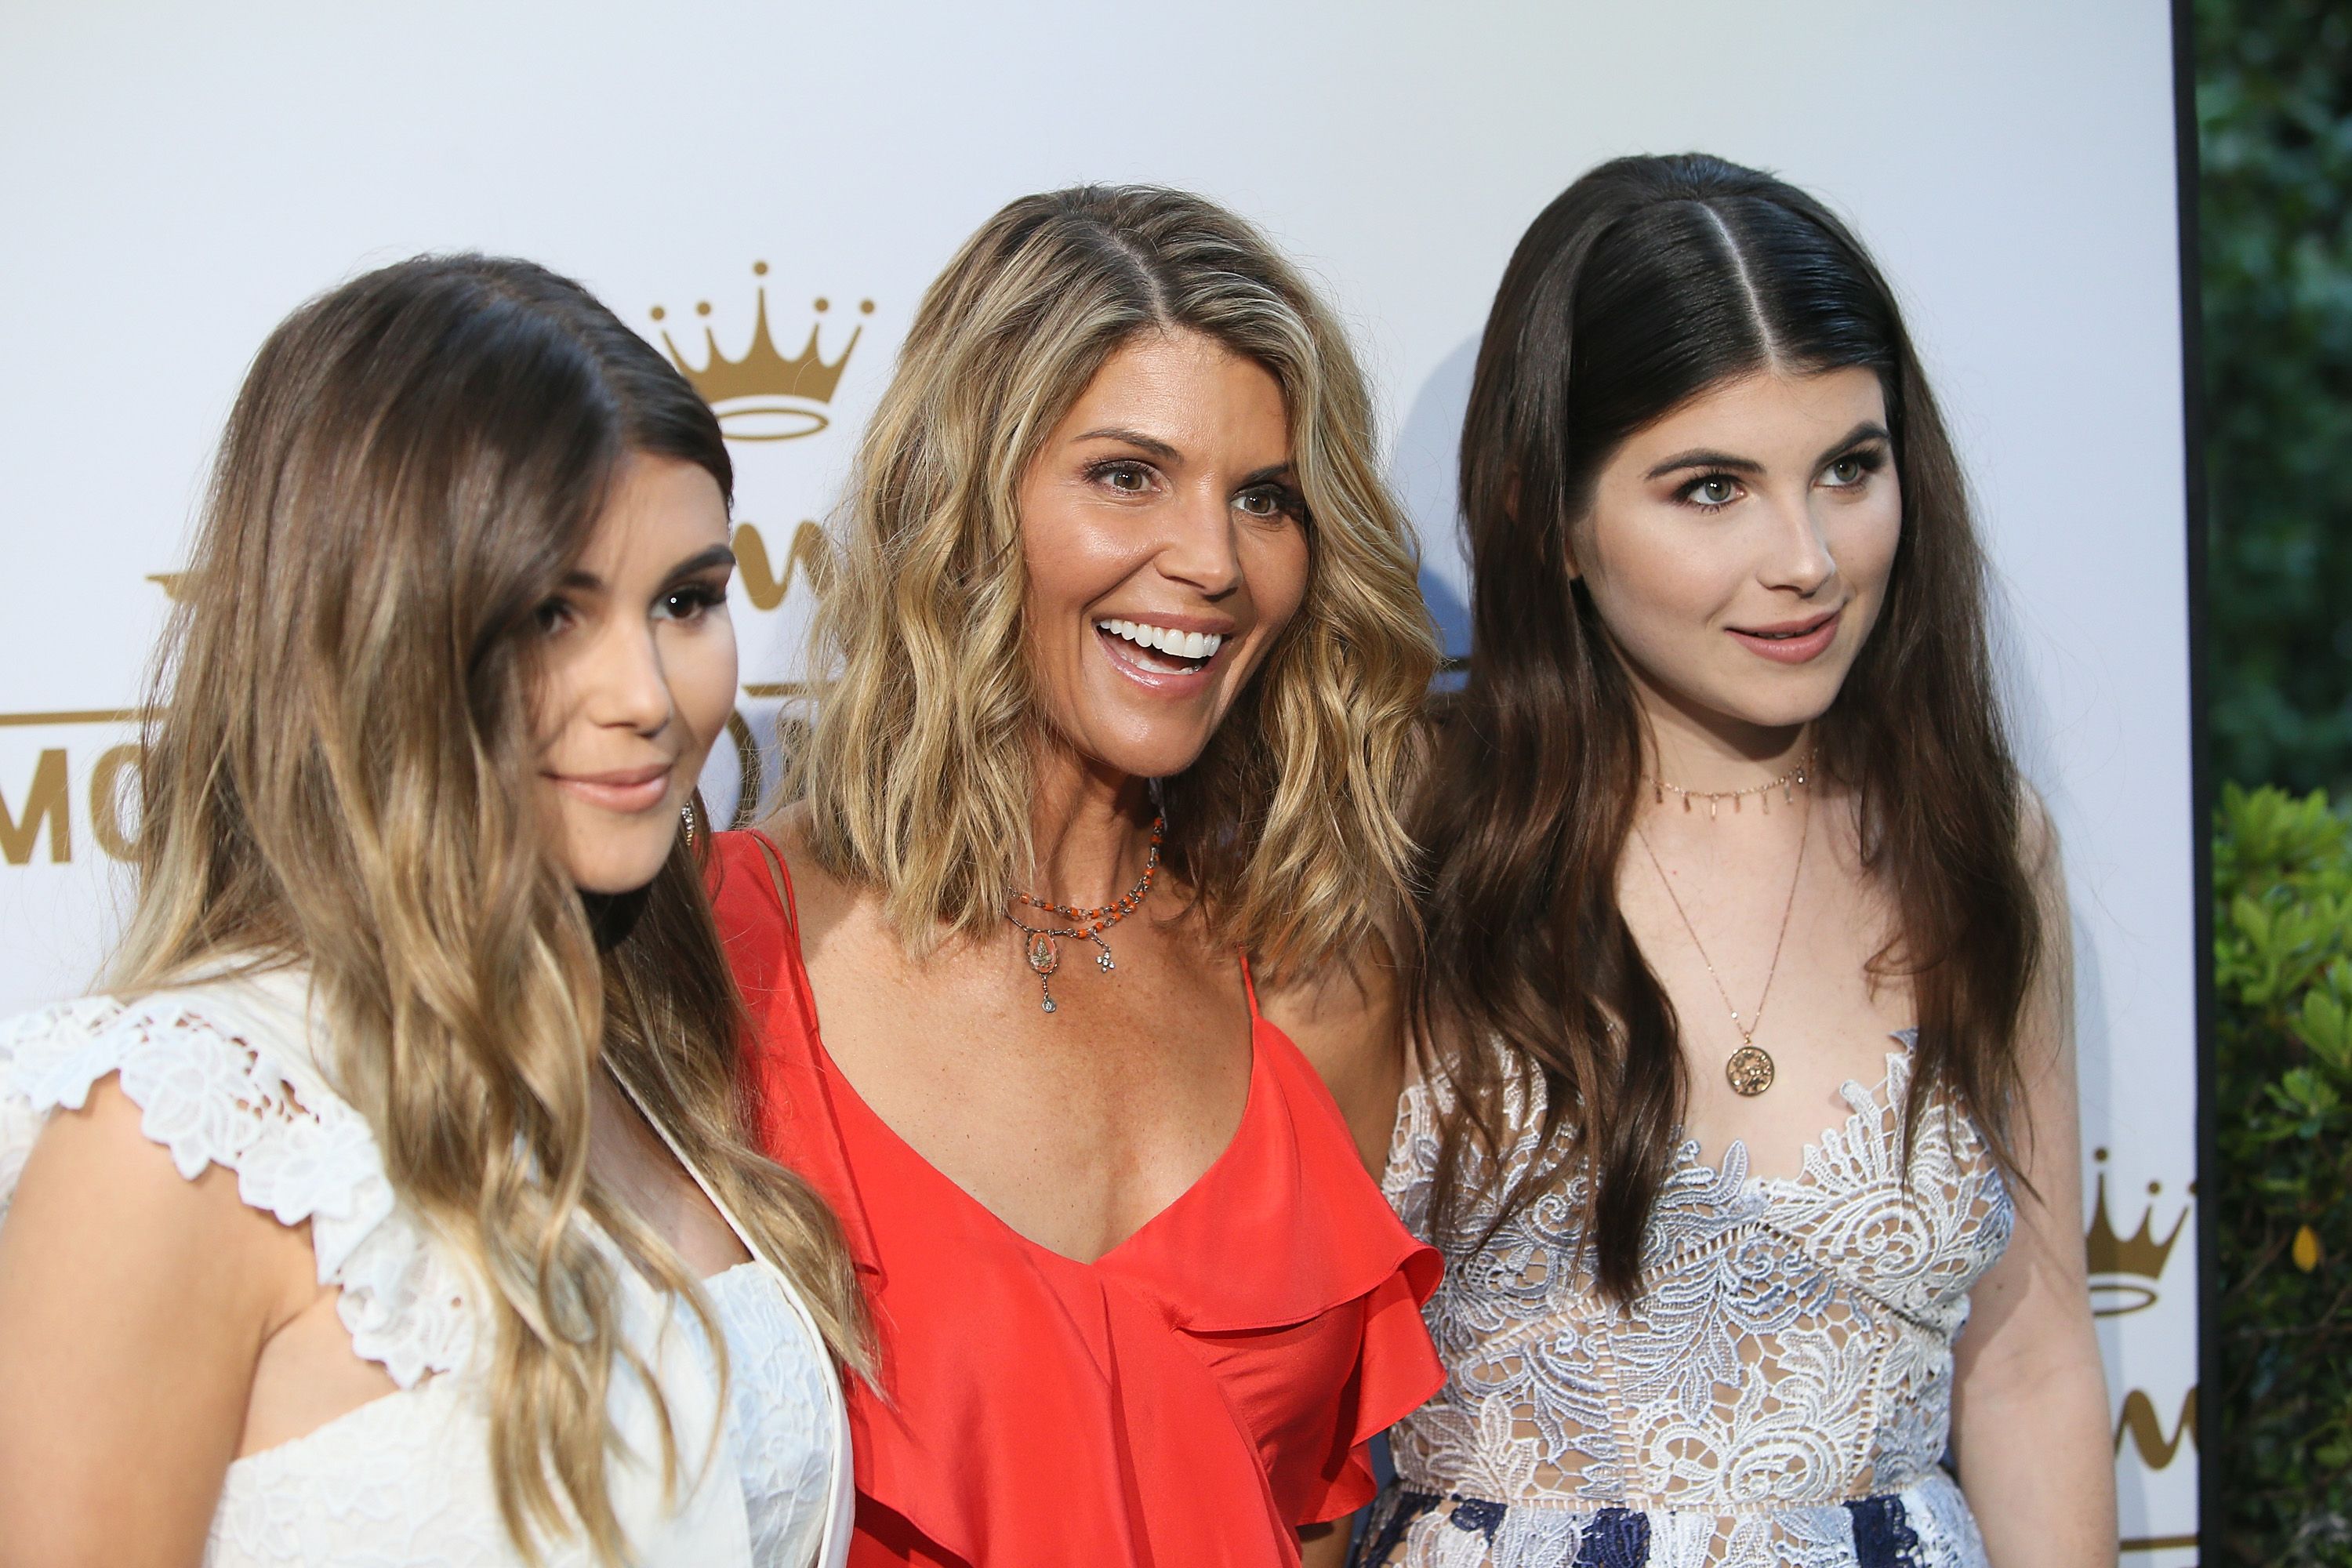 Lori Loughlin, Isabella Rose and Olivia Jade Giannulli attend the Hallmark Channel and Hallmark Movies and Mysteries 2017 Summer TCA Tour on July 27, 2017 in Beverly Hills, California. | Source: Getty Images